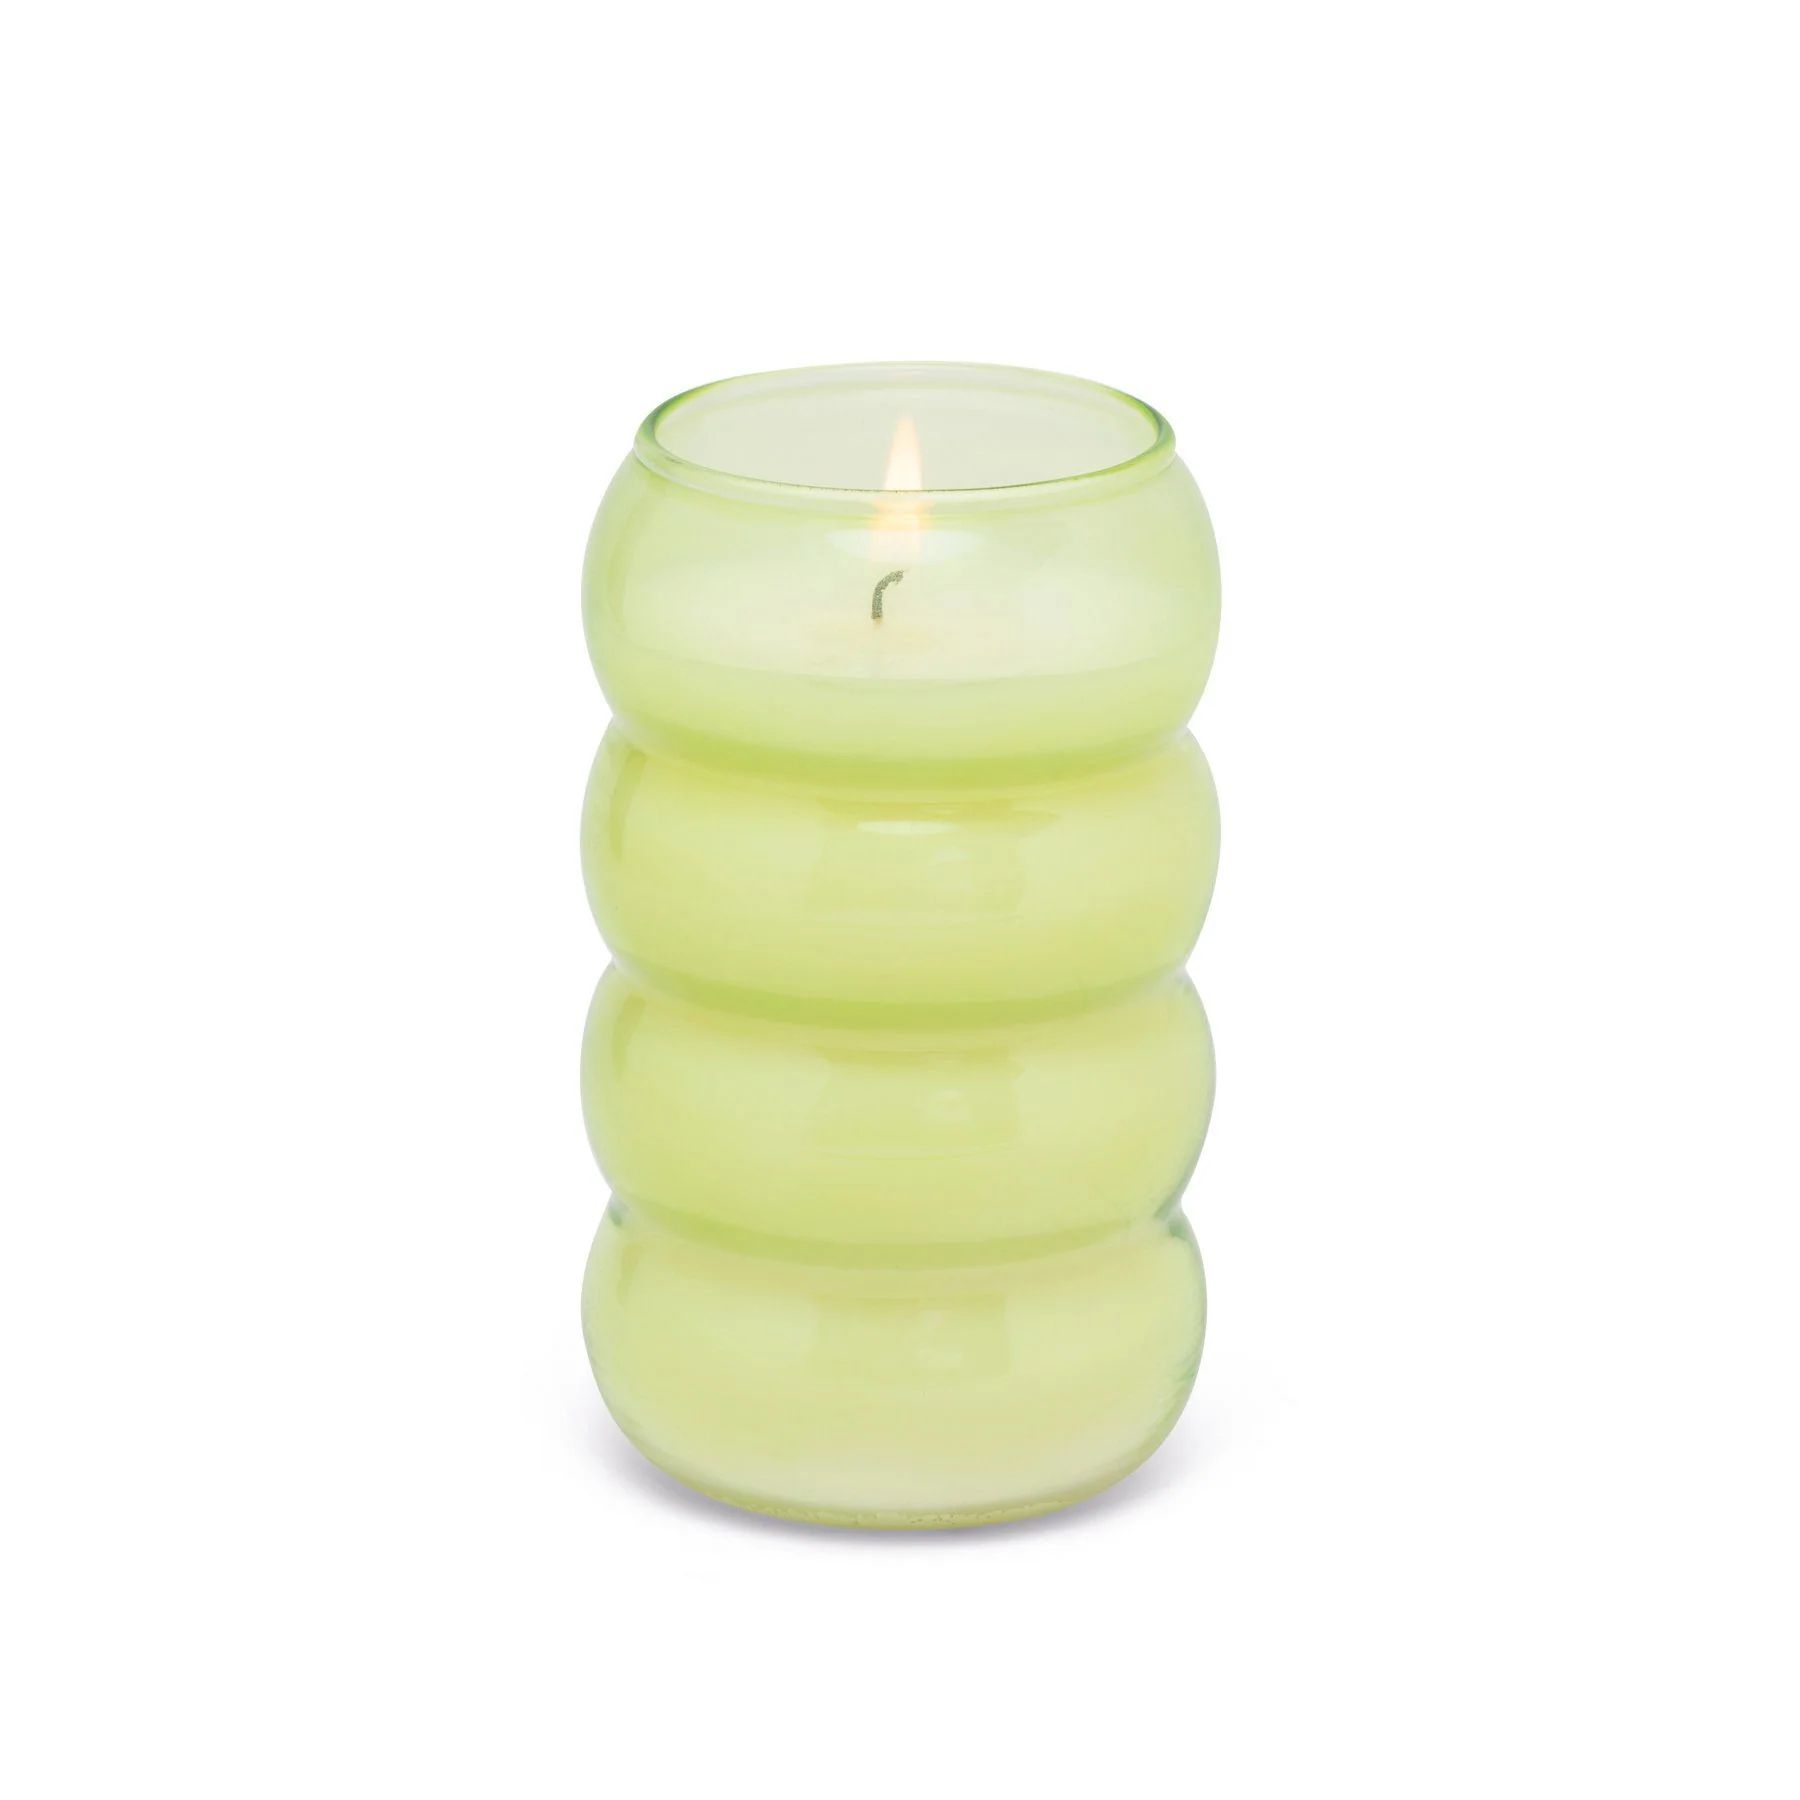 Realm 12 oz Candle - Bamboo | Paddywax